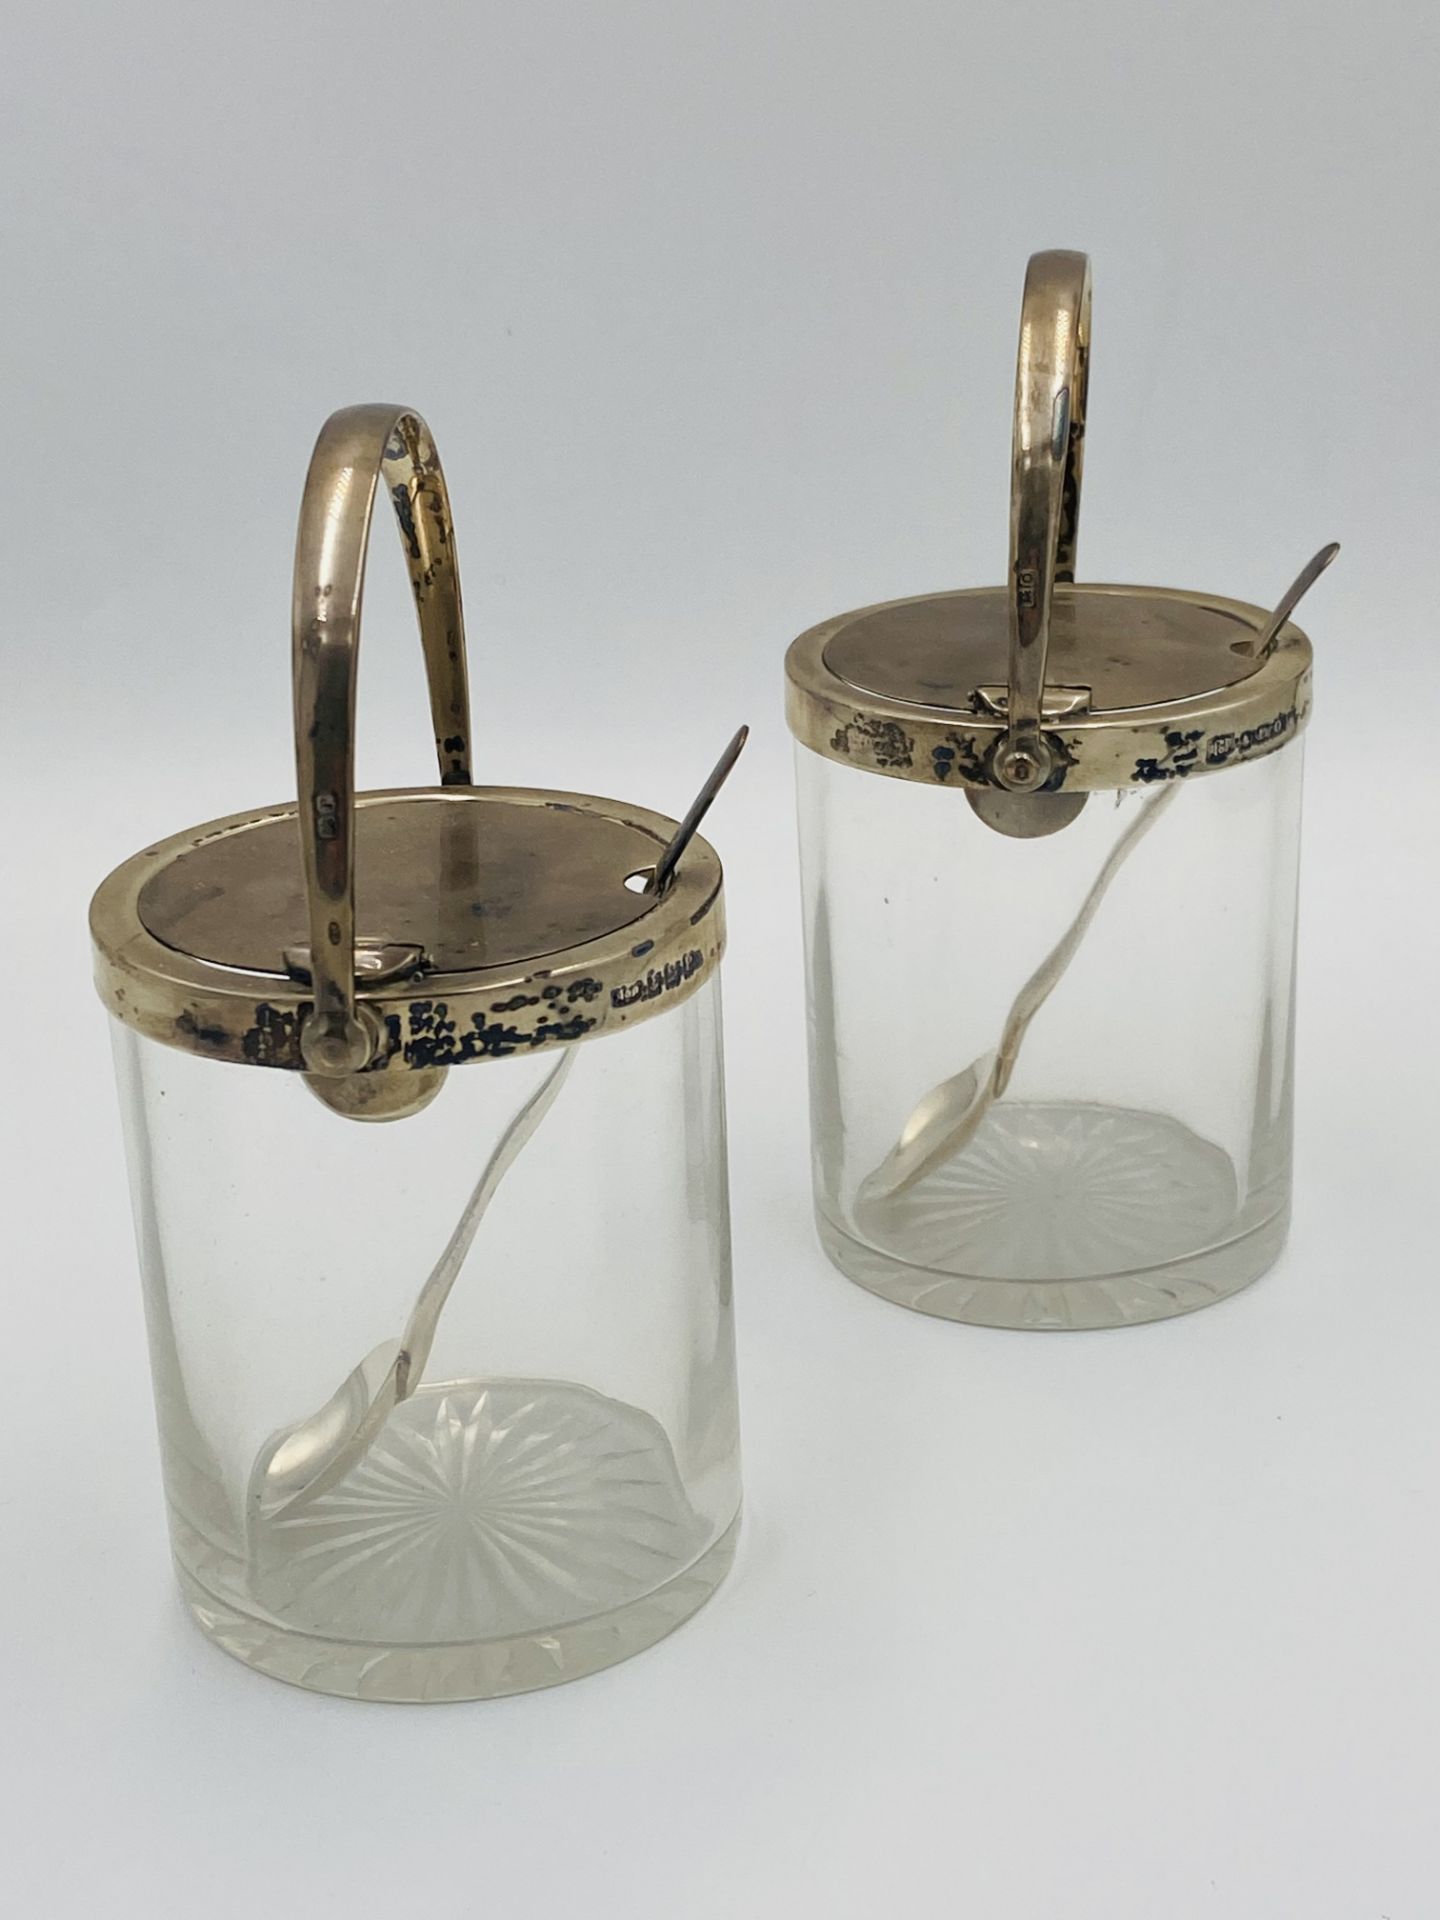 Pair of Hukin & Heath silver mounted glass preserve jars - Image 10 of 12